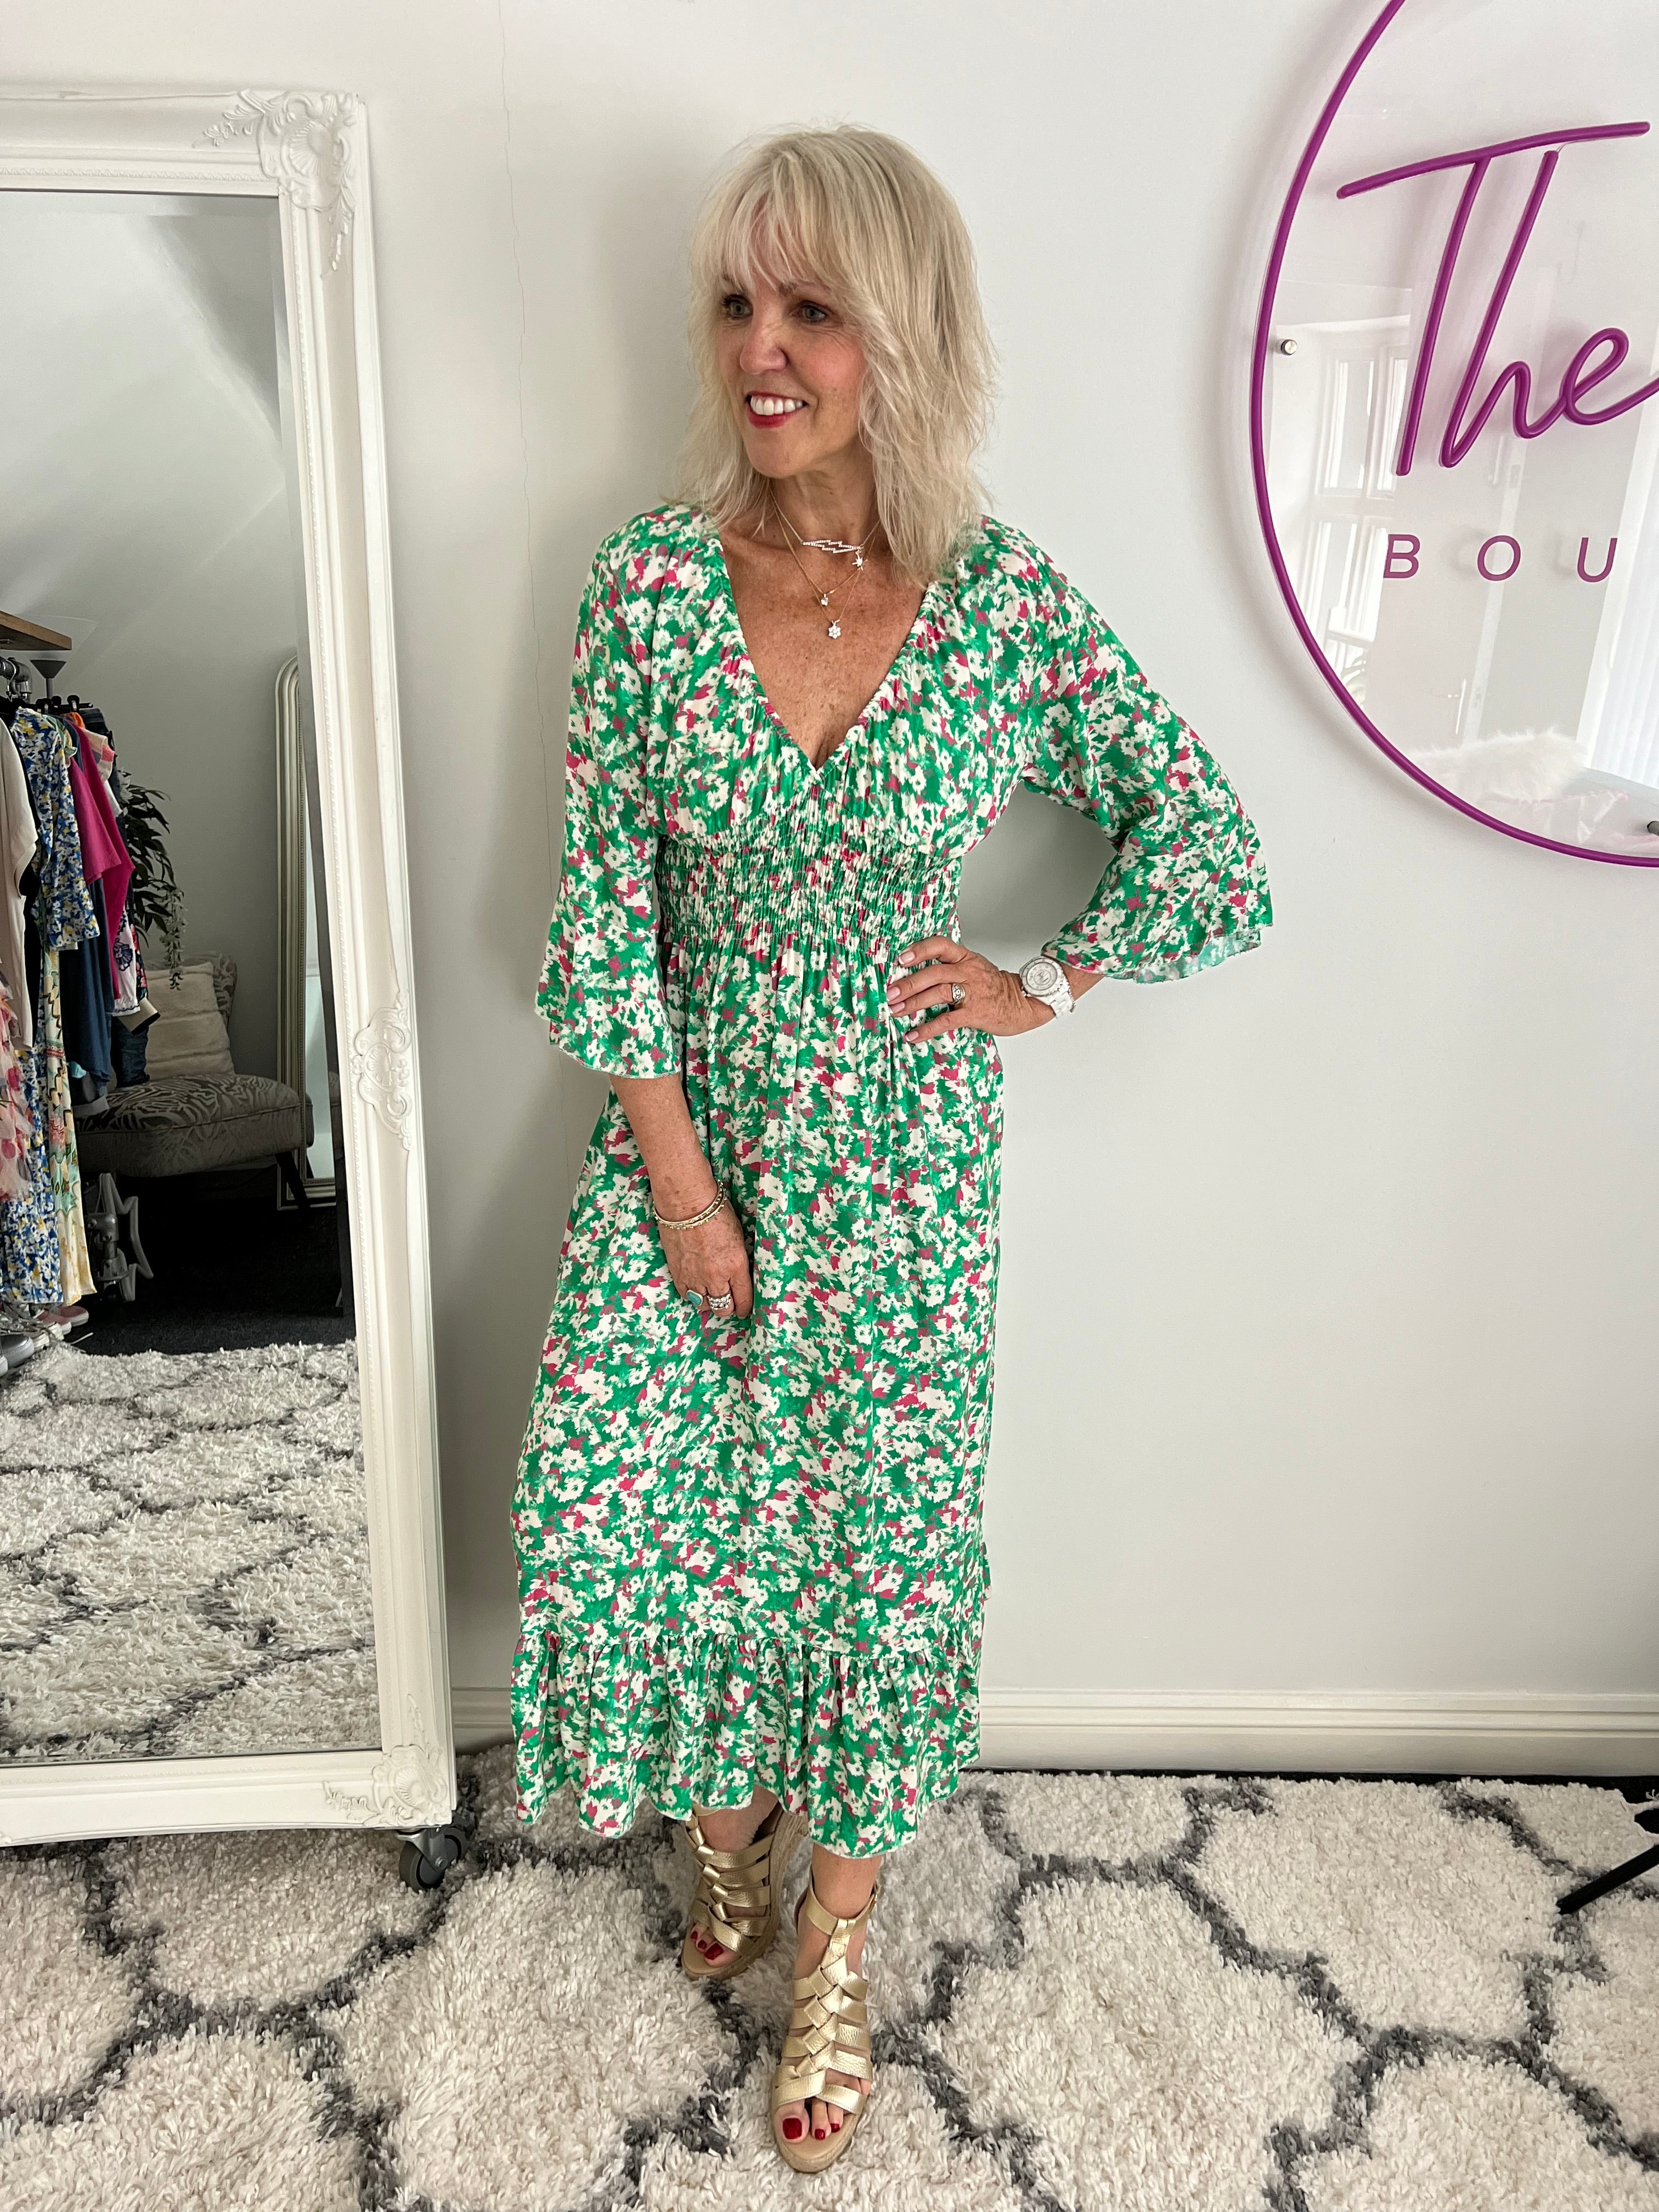 Floral Midi Dress in Green & Pink